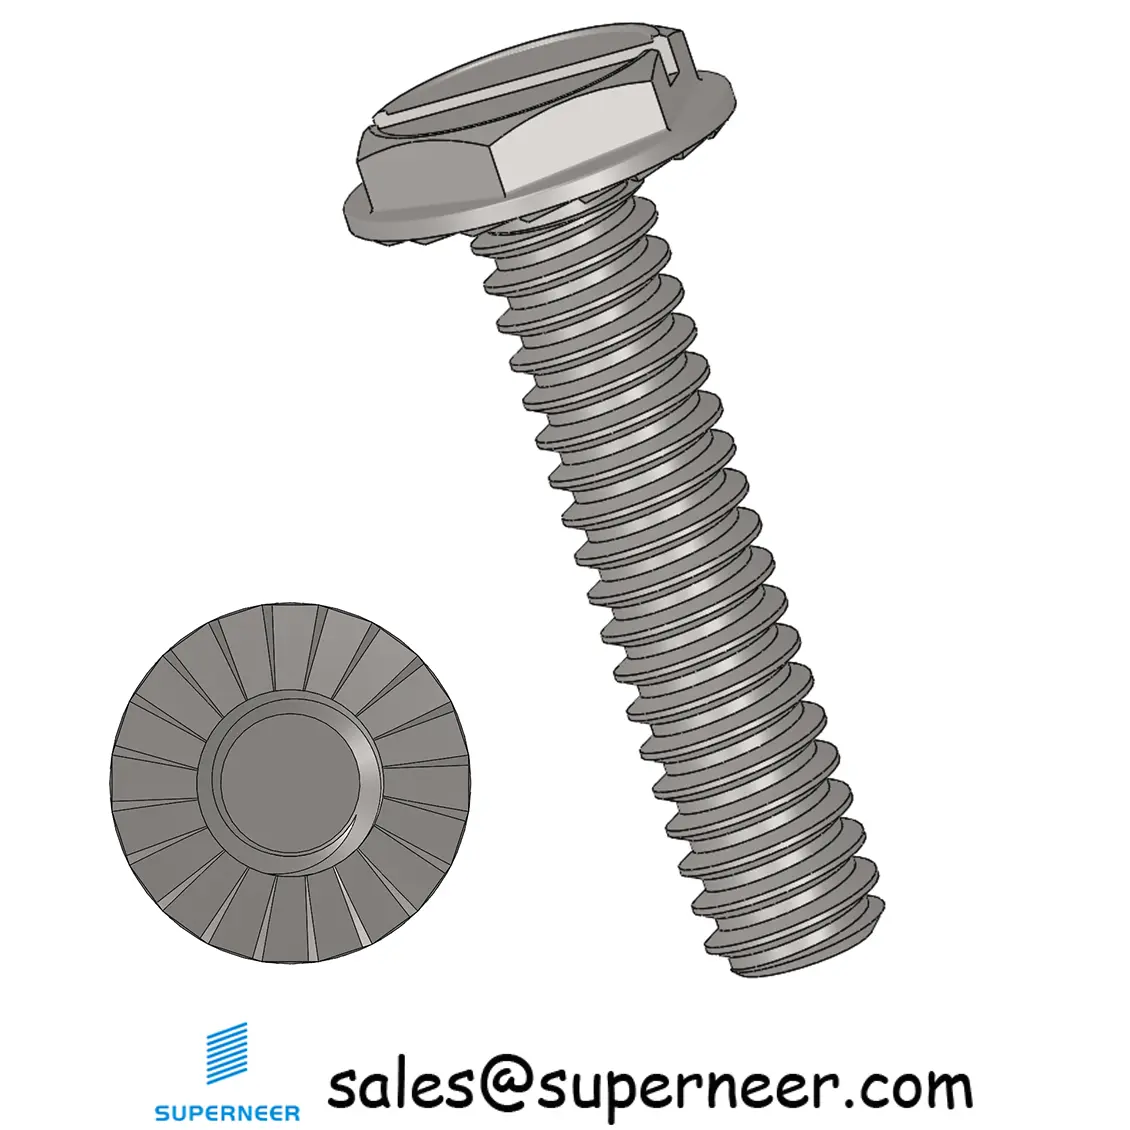 4-40 x 1/2" Indented Hex Washer Serrated Head Slotted Machine Screw SUS304 Stainless Steel Inox